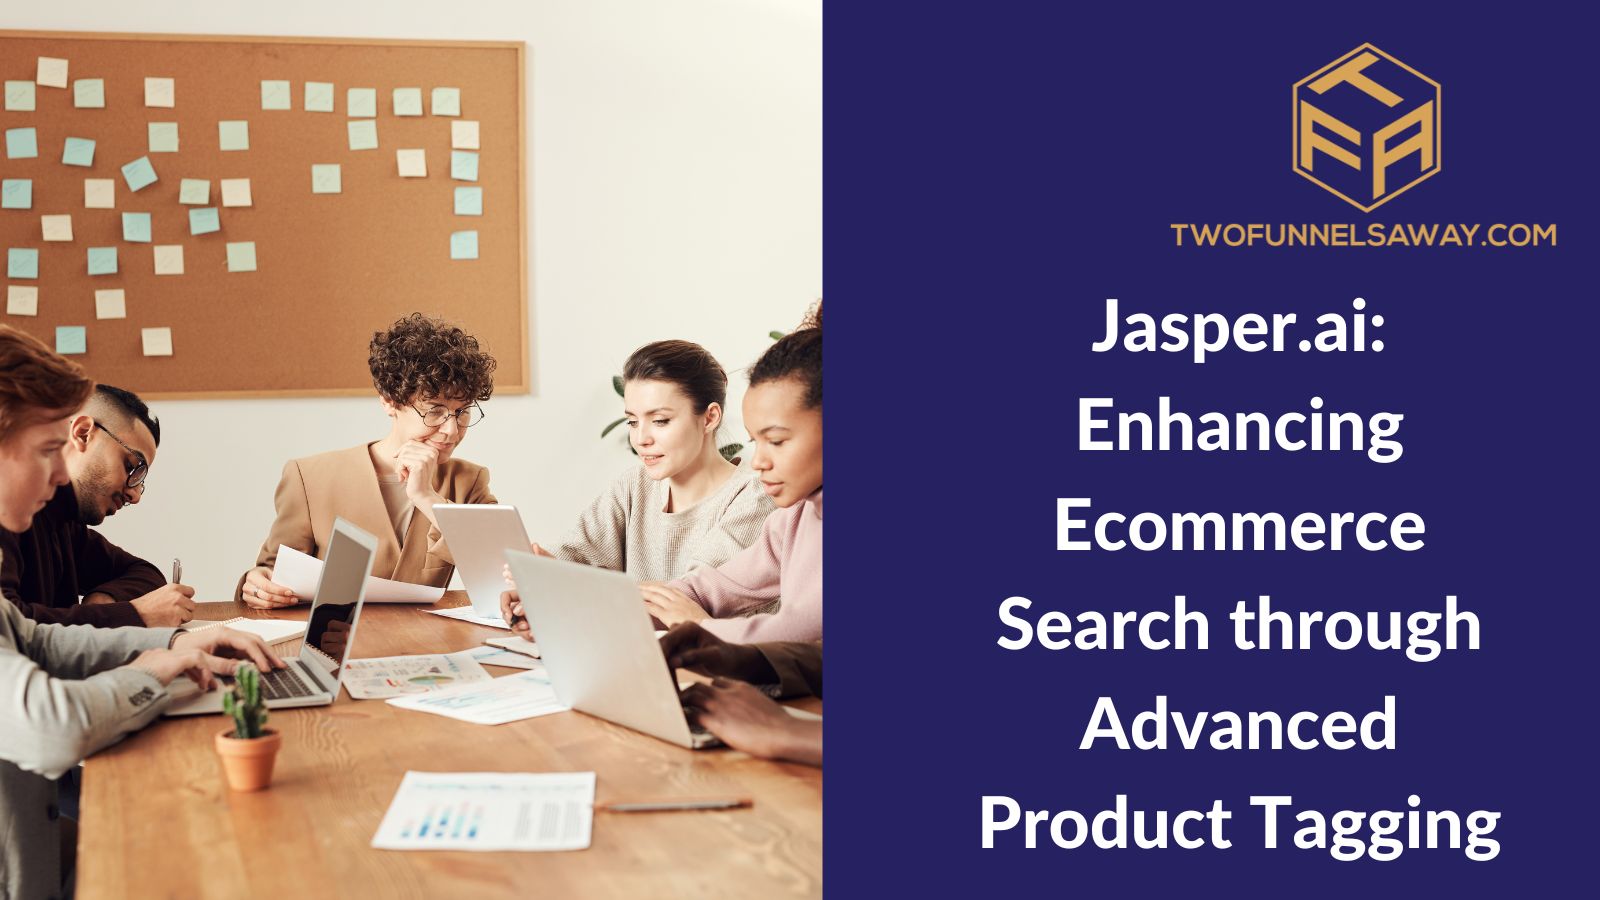 advanced product tagging Jasper.ai Enhancing Ecommerce Search through Advanced Product Tagging fatal error, custom text, z index, stay tuned, brand, category, example, more opportunities, create, website, new products, creating,